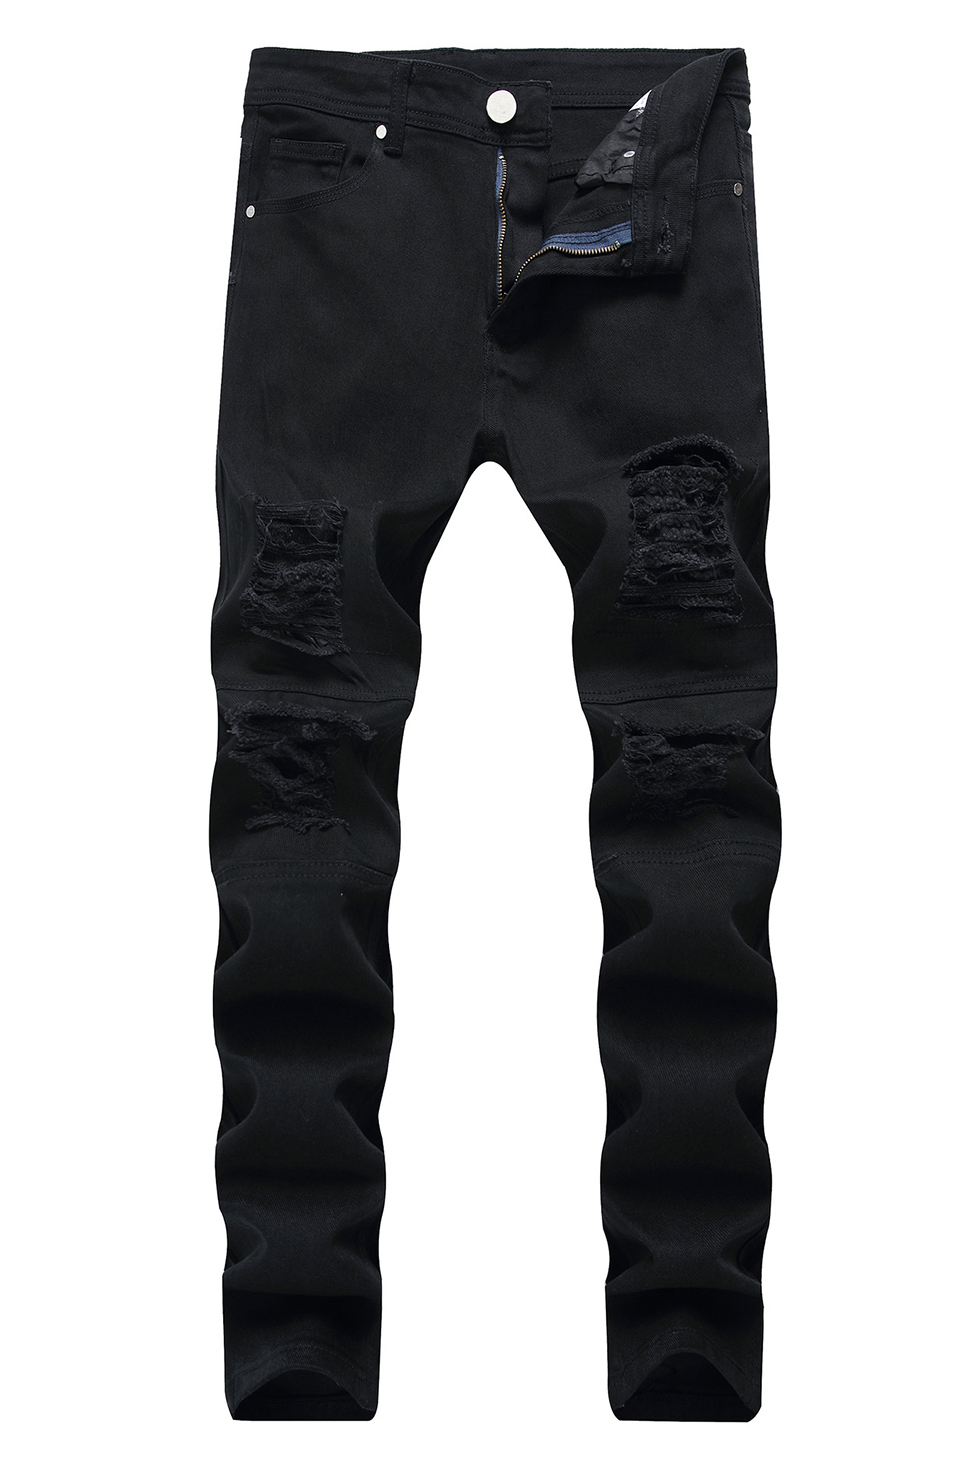 black fitted jeans mens